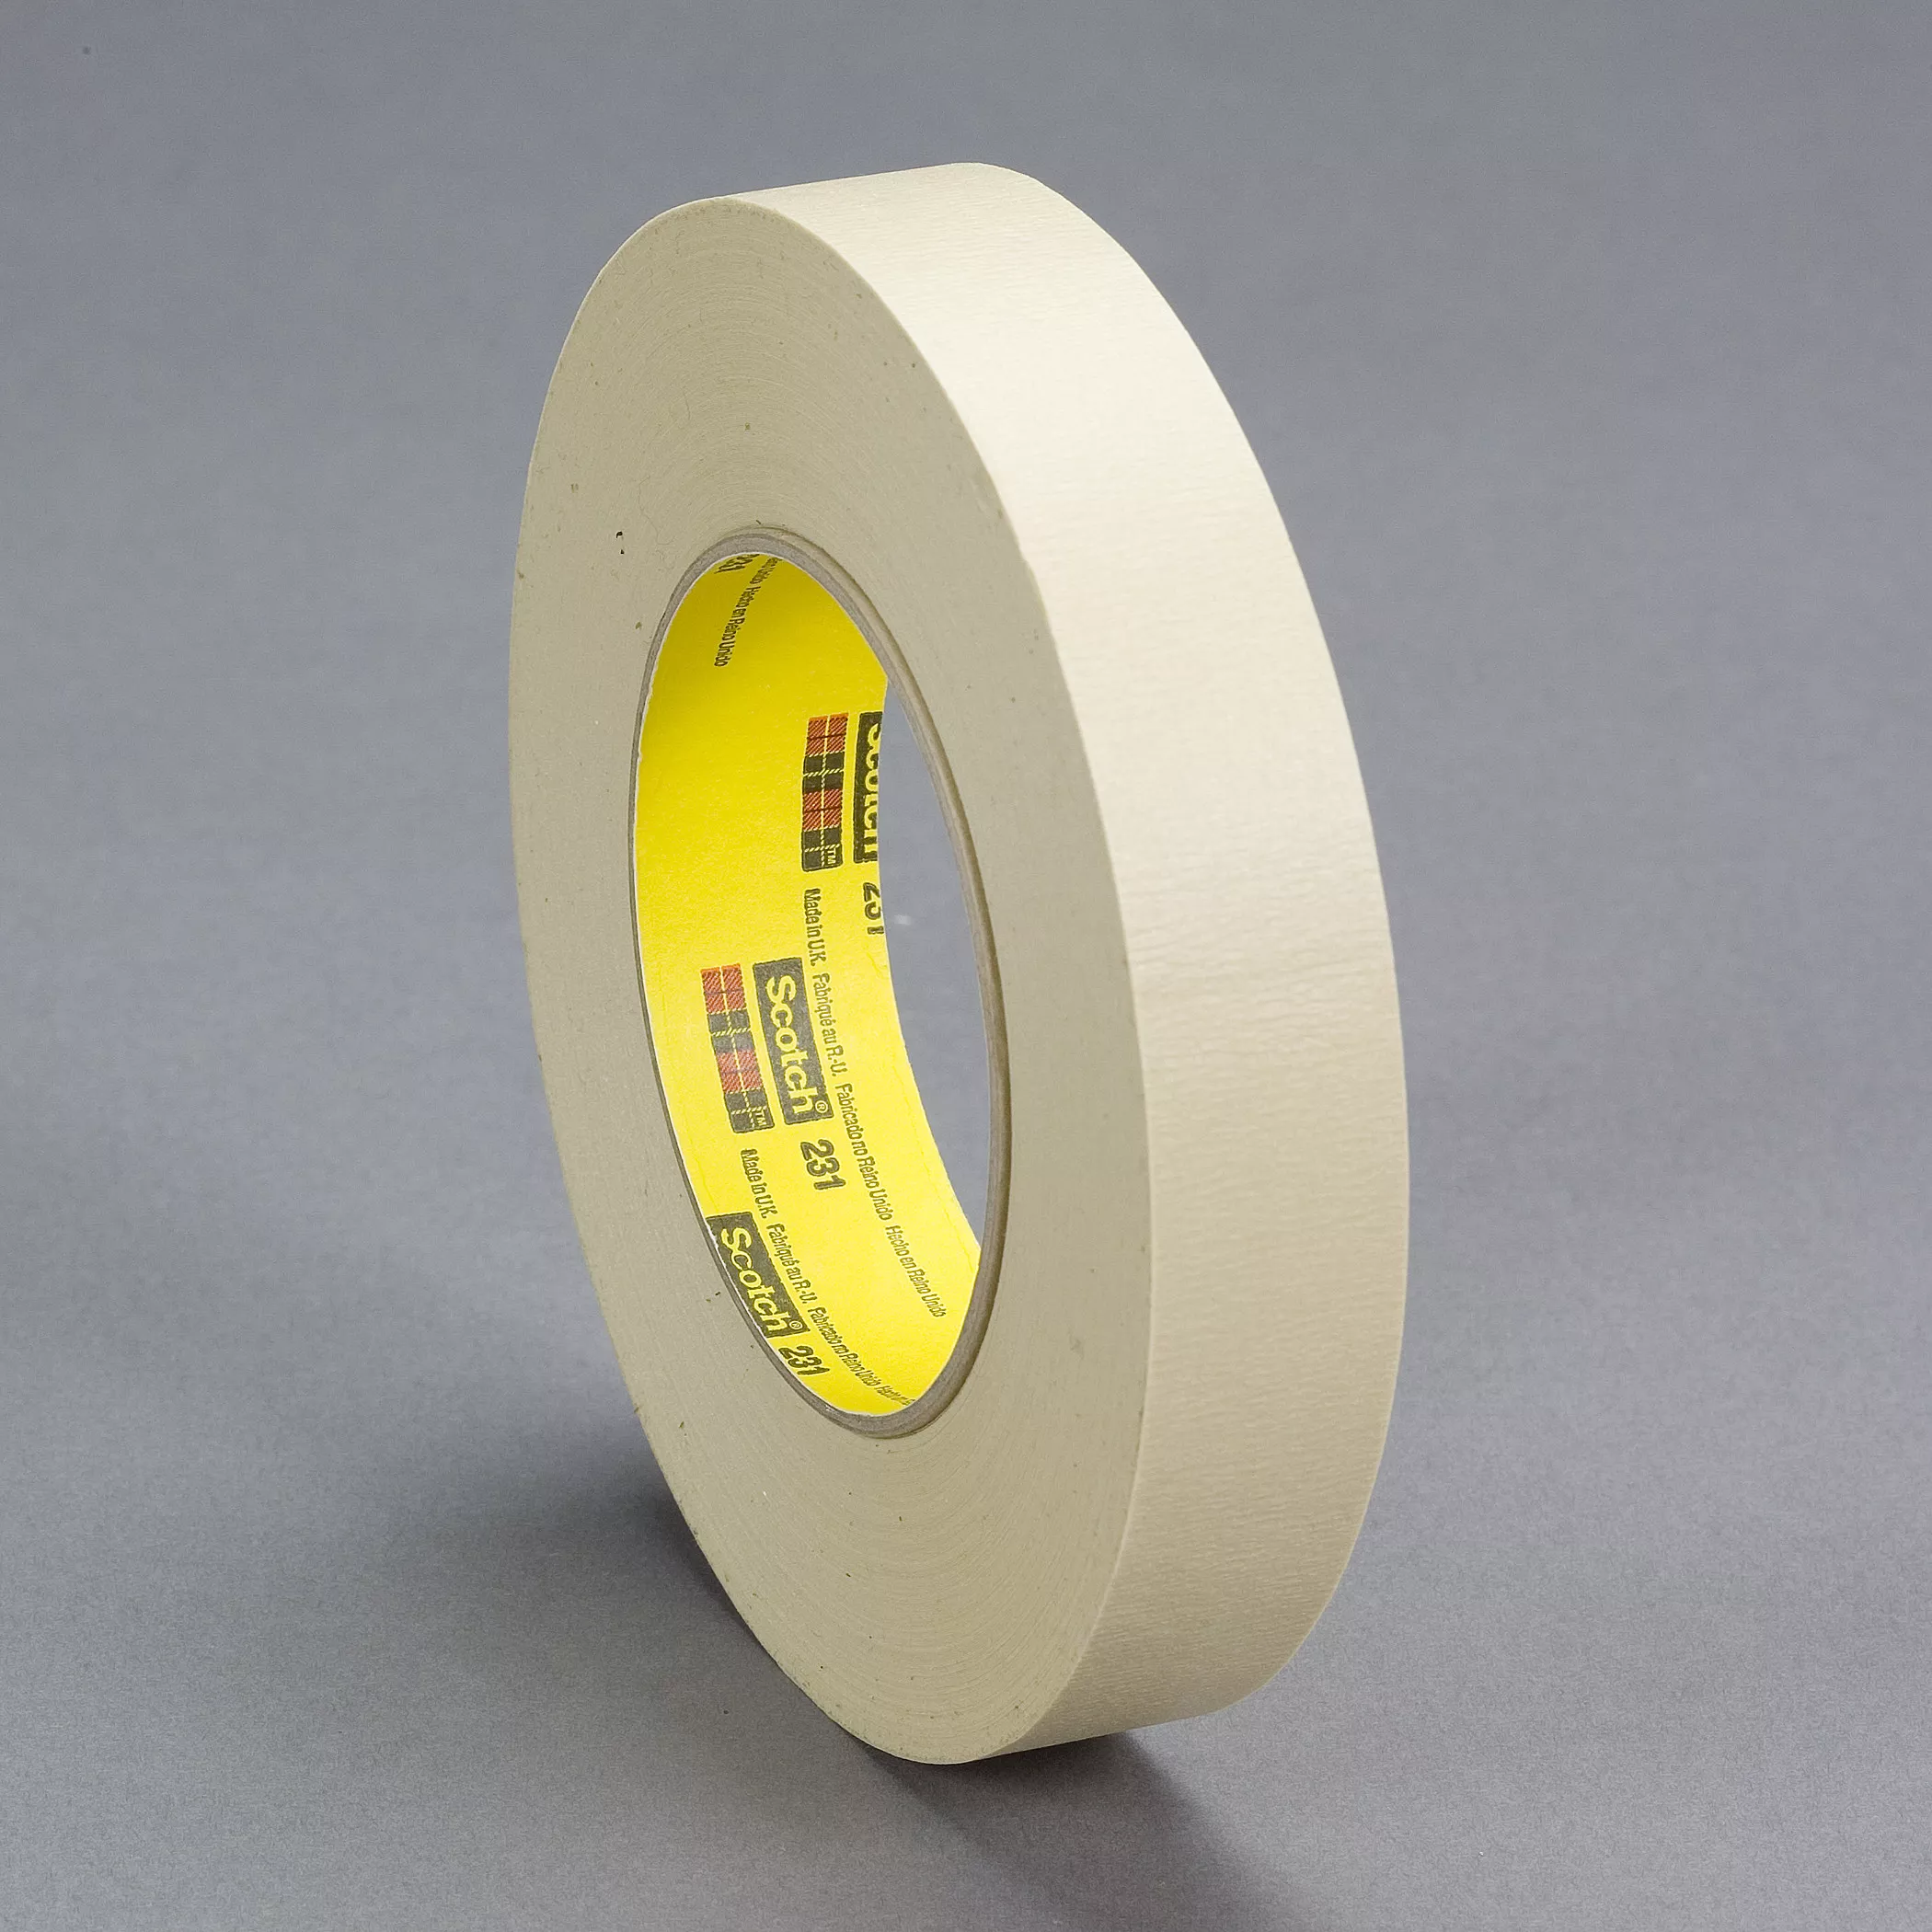 3M™ Paint Masking Tape 231/231A, Tan, 3-1/4 in x 60 yd, 7.6 mil, 16 Roll/Case